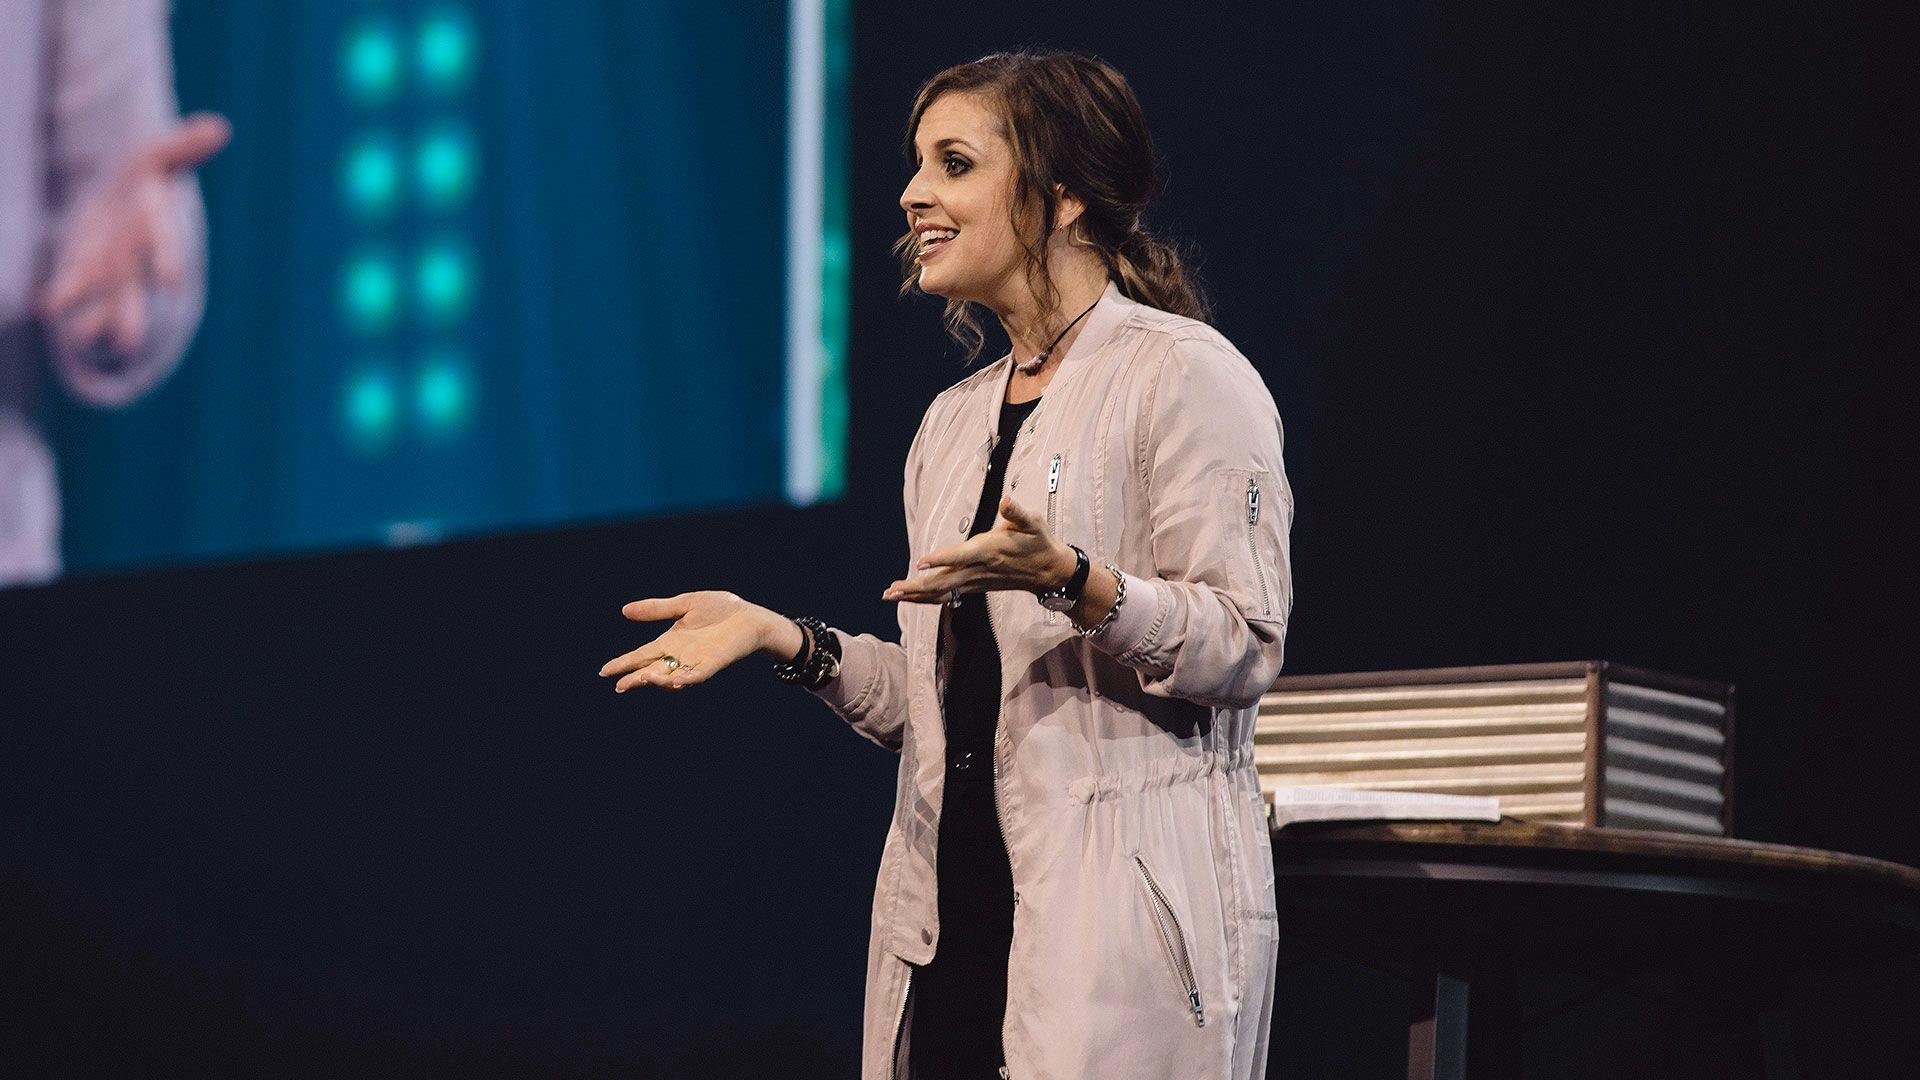 Pastor Holly Furtick preaching "The Cost Of Cover Up" at Elevation Church